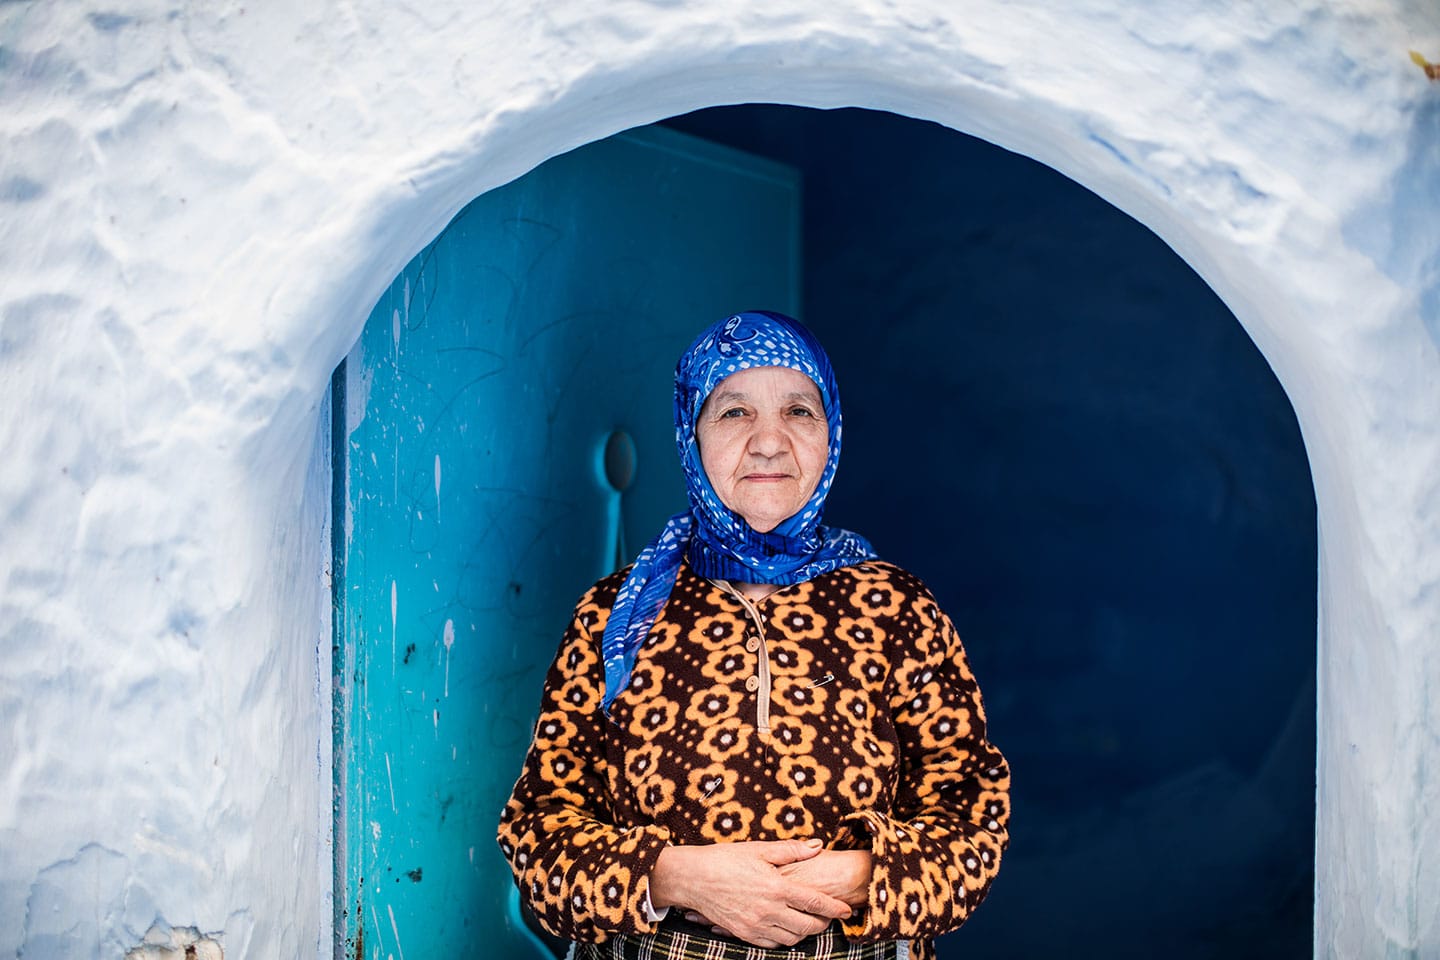 Women at her doorstep in the blue town of Chefchaouen, Morocco